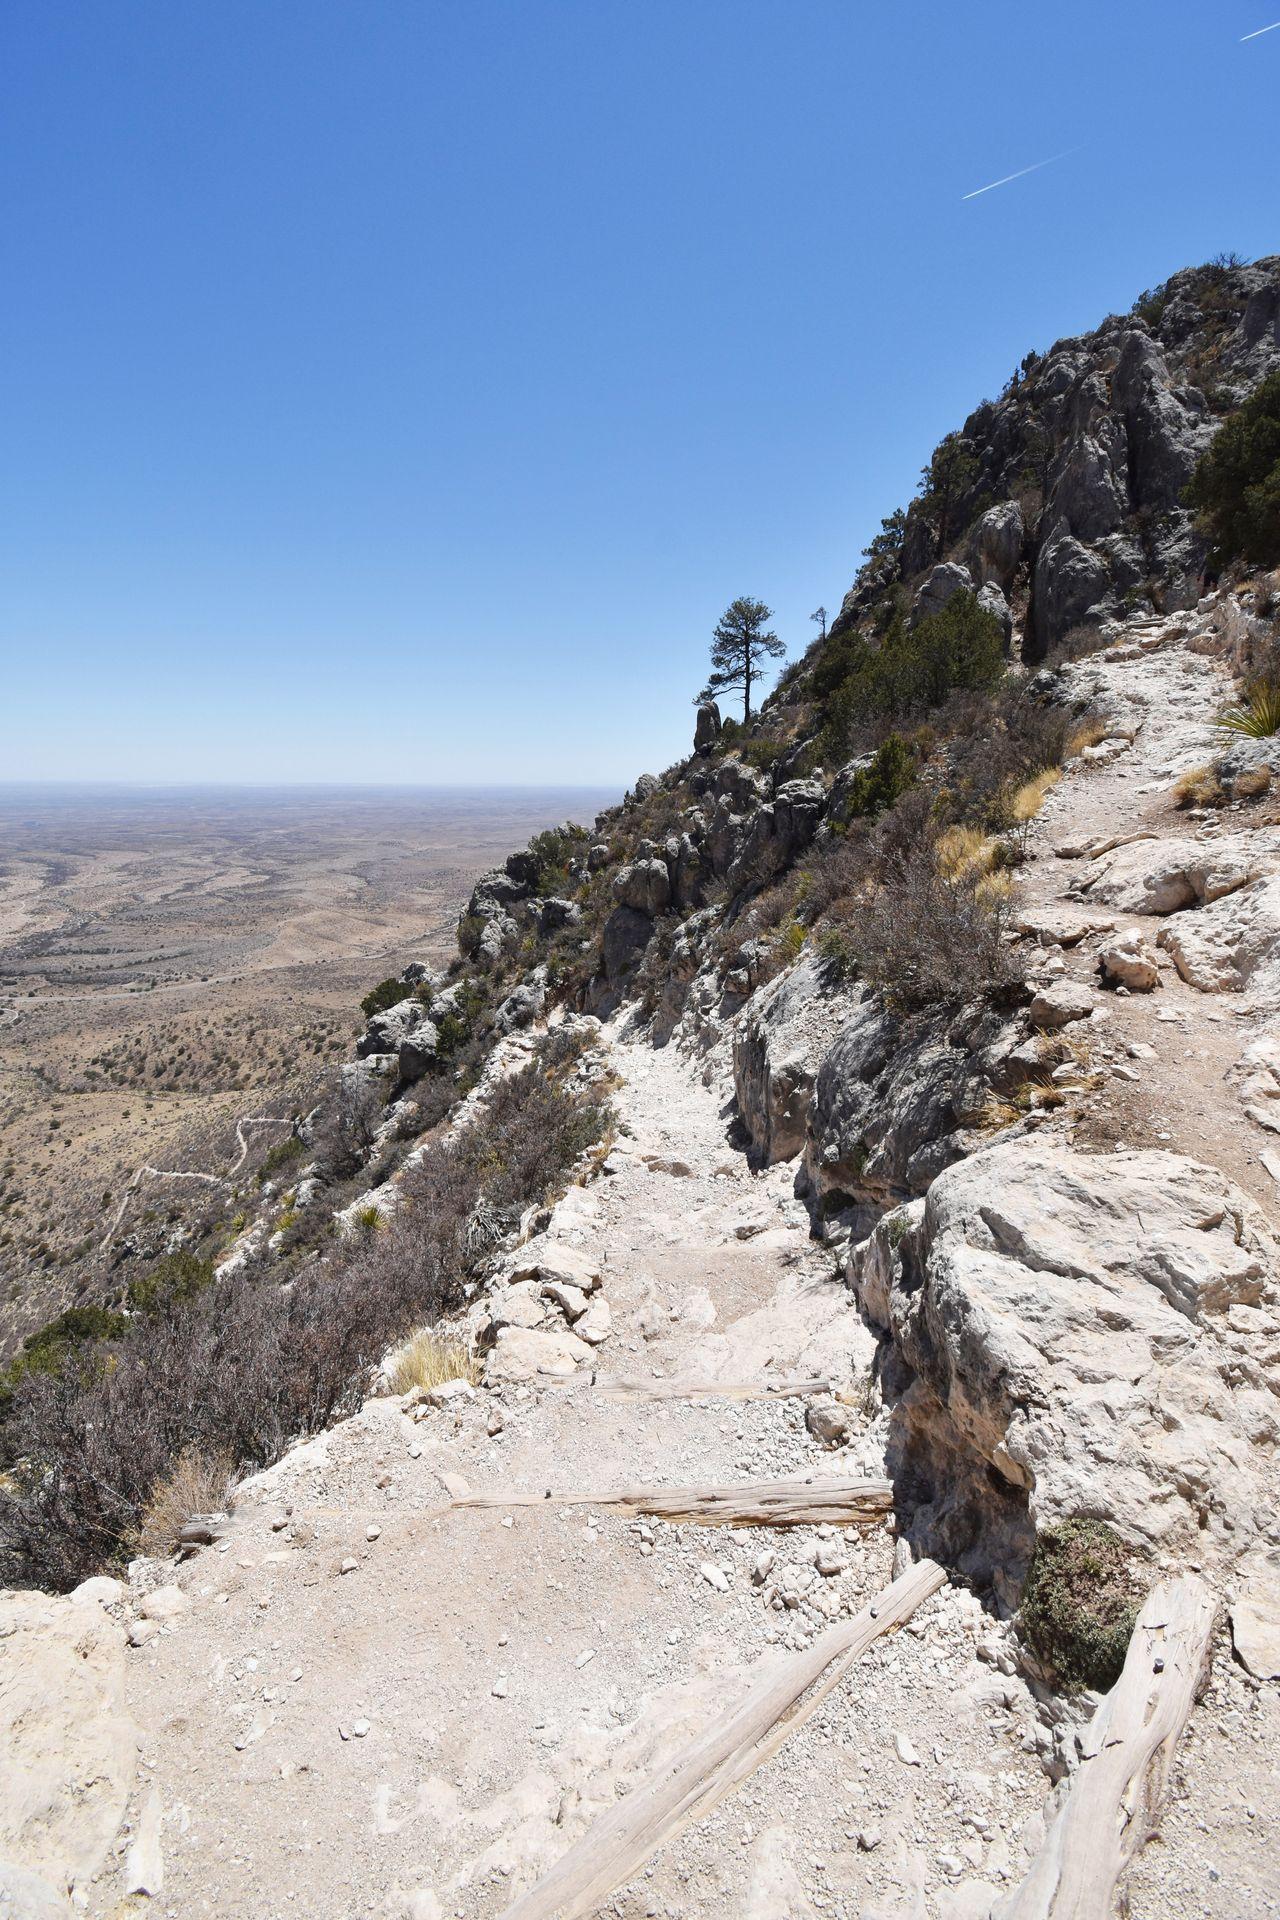 A view of a trail on the side of a mountain on the Guadalupe Peak trail.